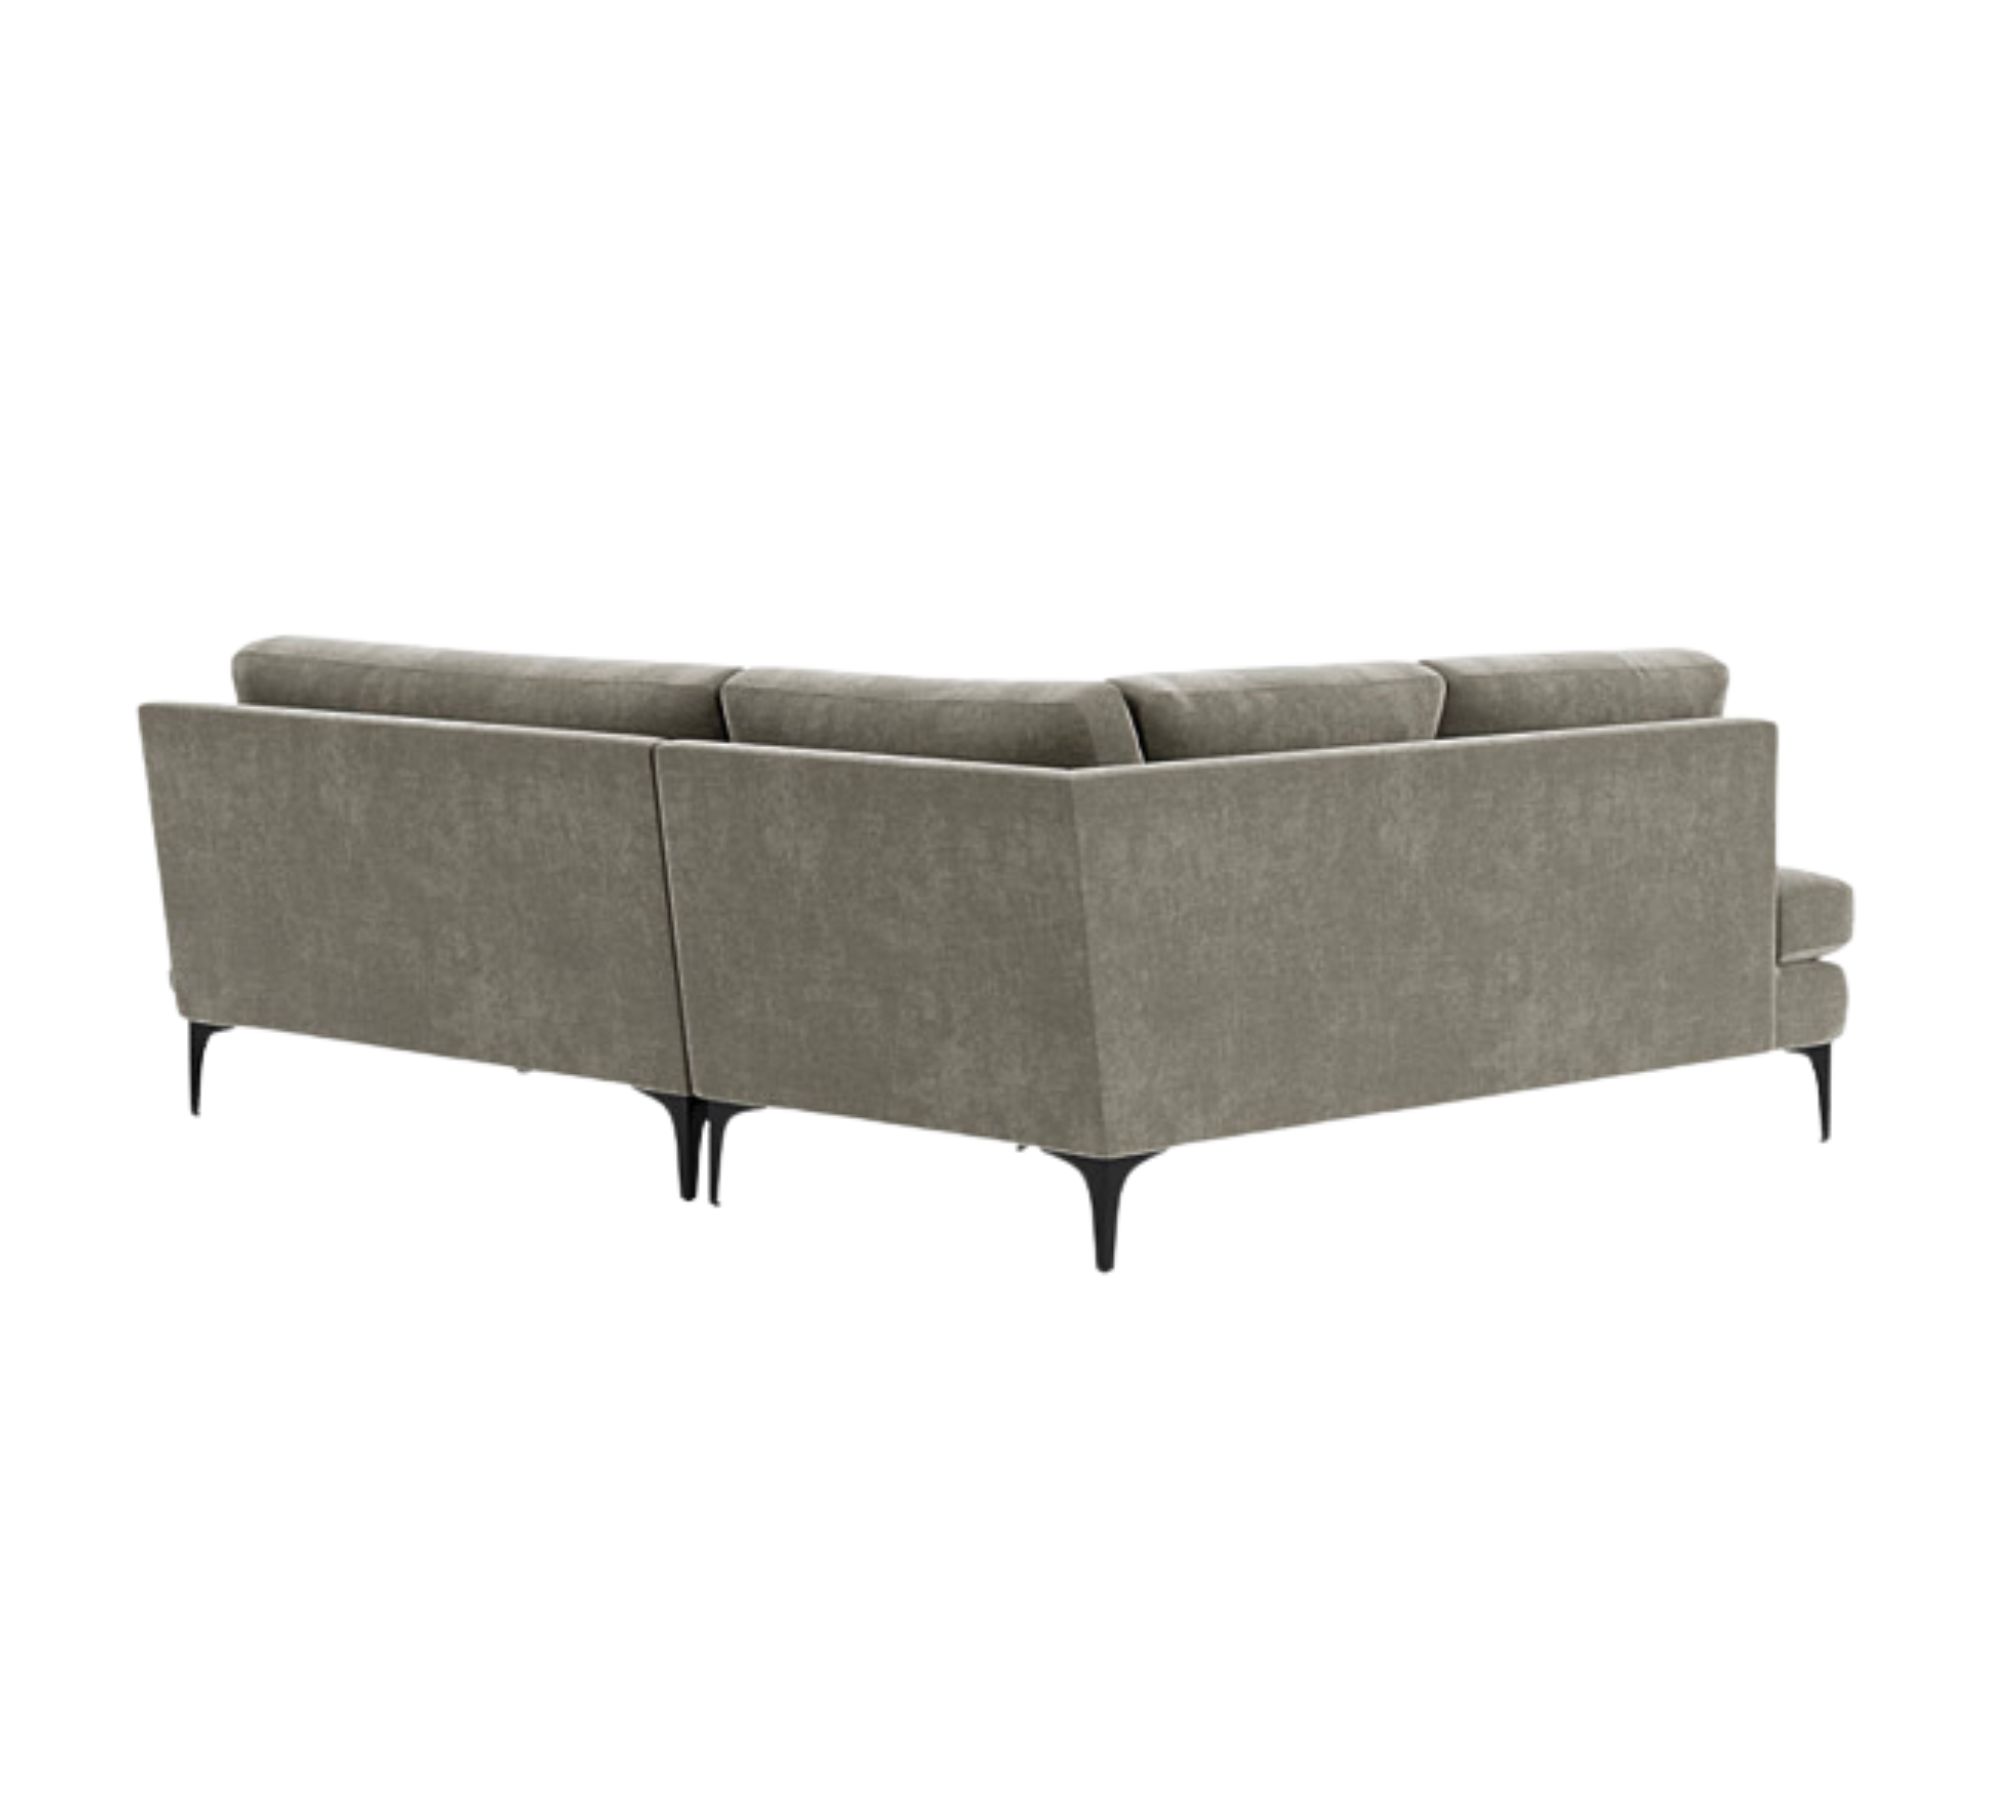 Astha Sofa Récamiere Links Planet Grey Green